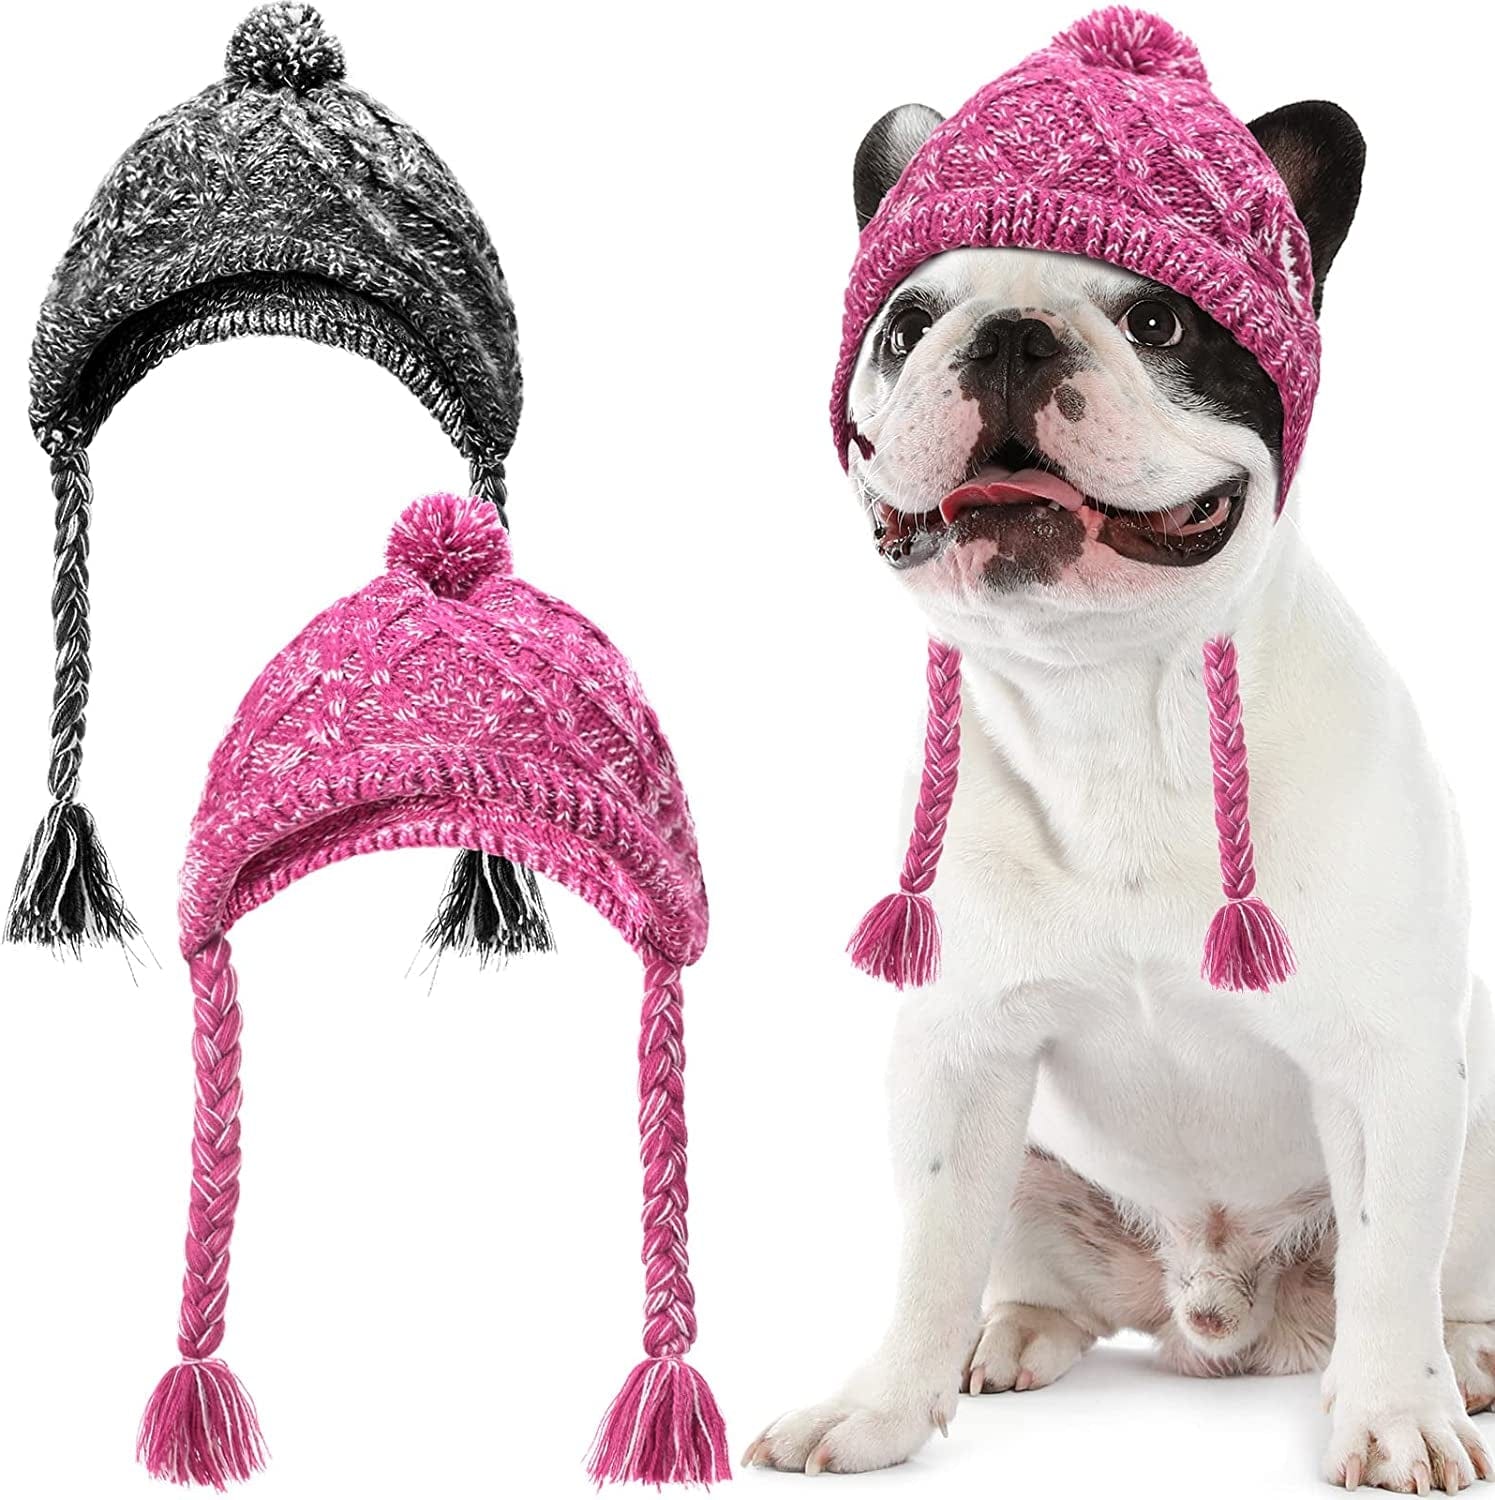 Warm Pet Dog Knitted Hat,Dog Hats for Small Dogs,Warm Winter Dog Hat Knit  Snood Headwear for Pets, Pet Christmas Winter Warm Caps (L)